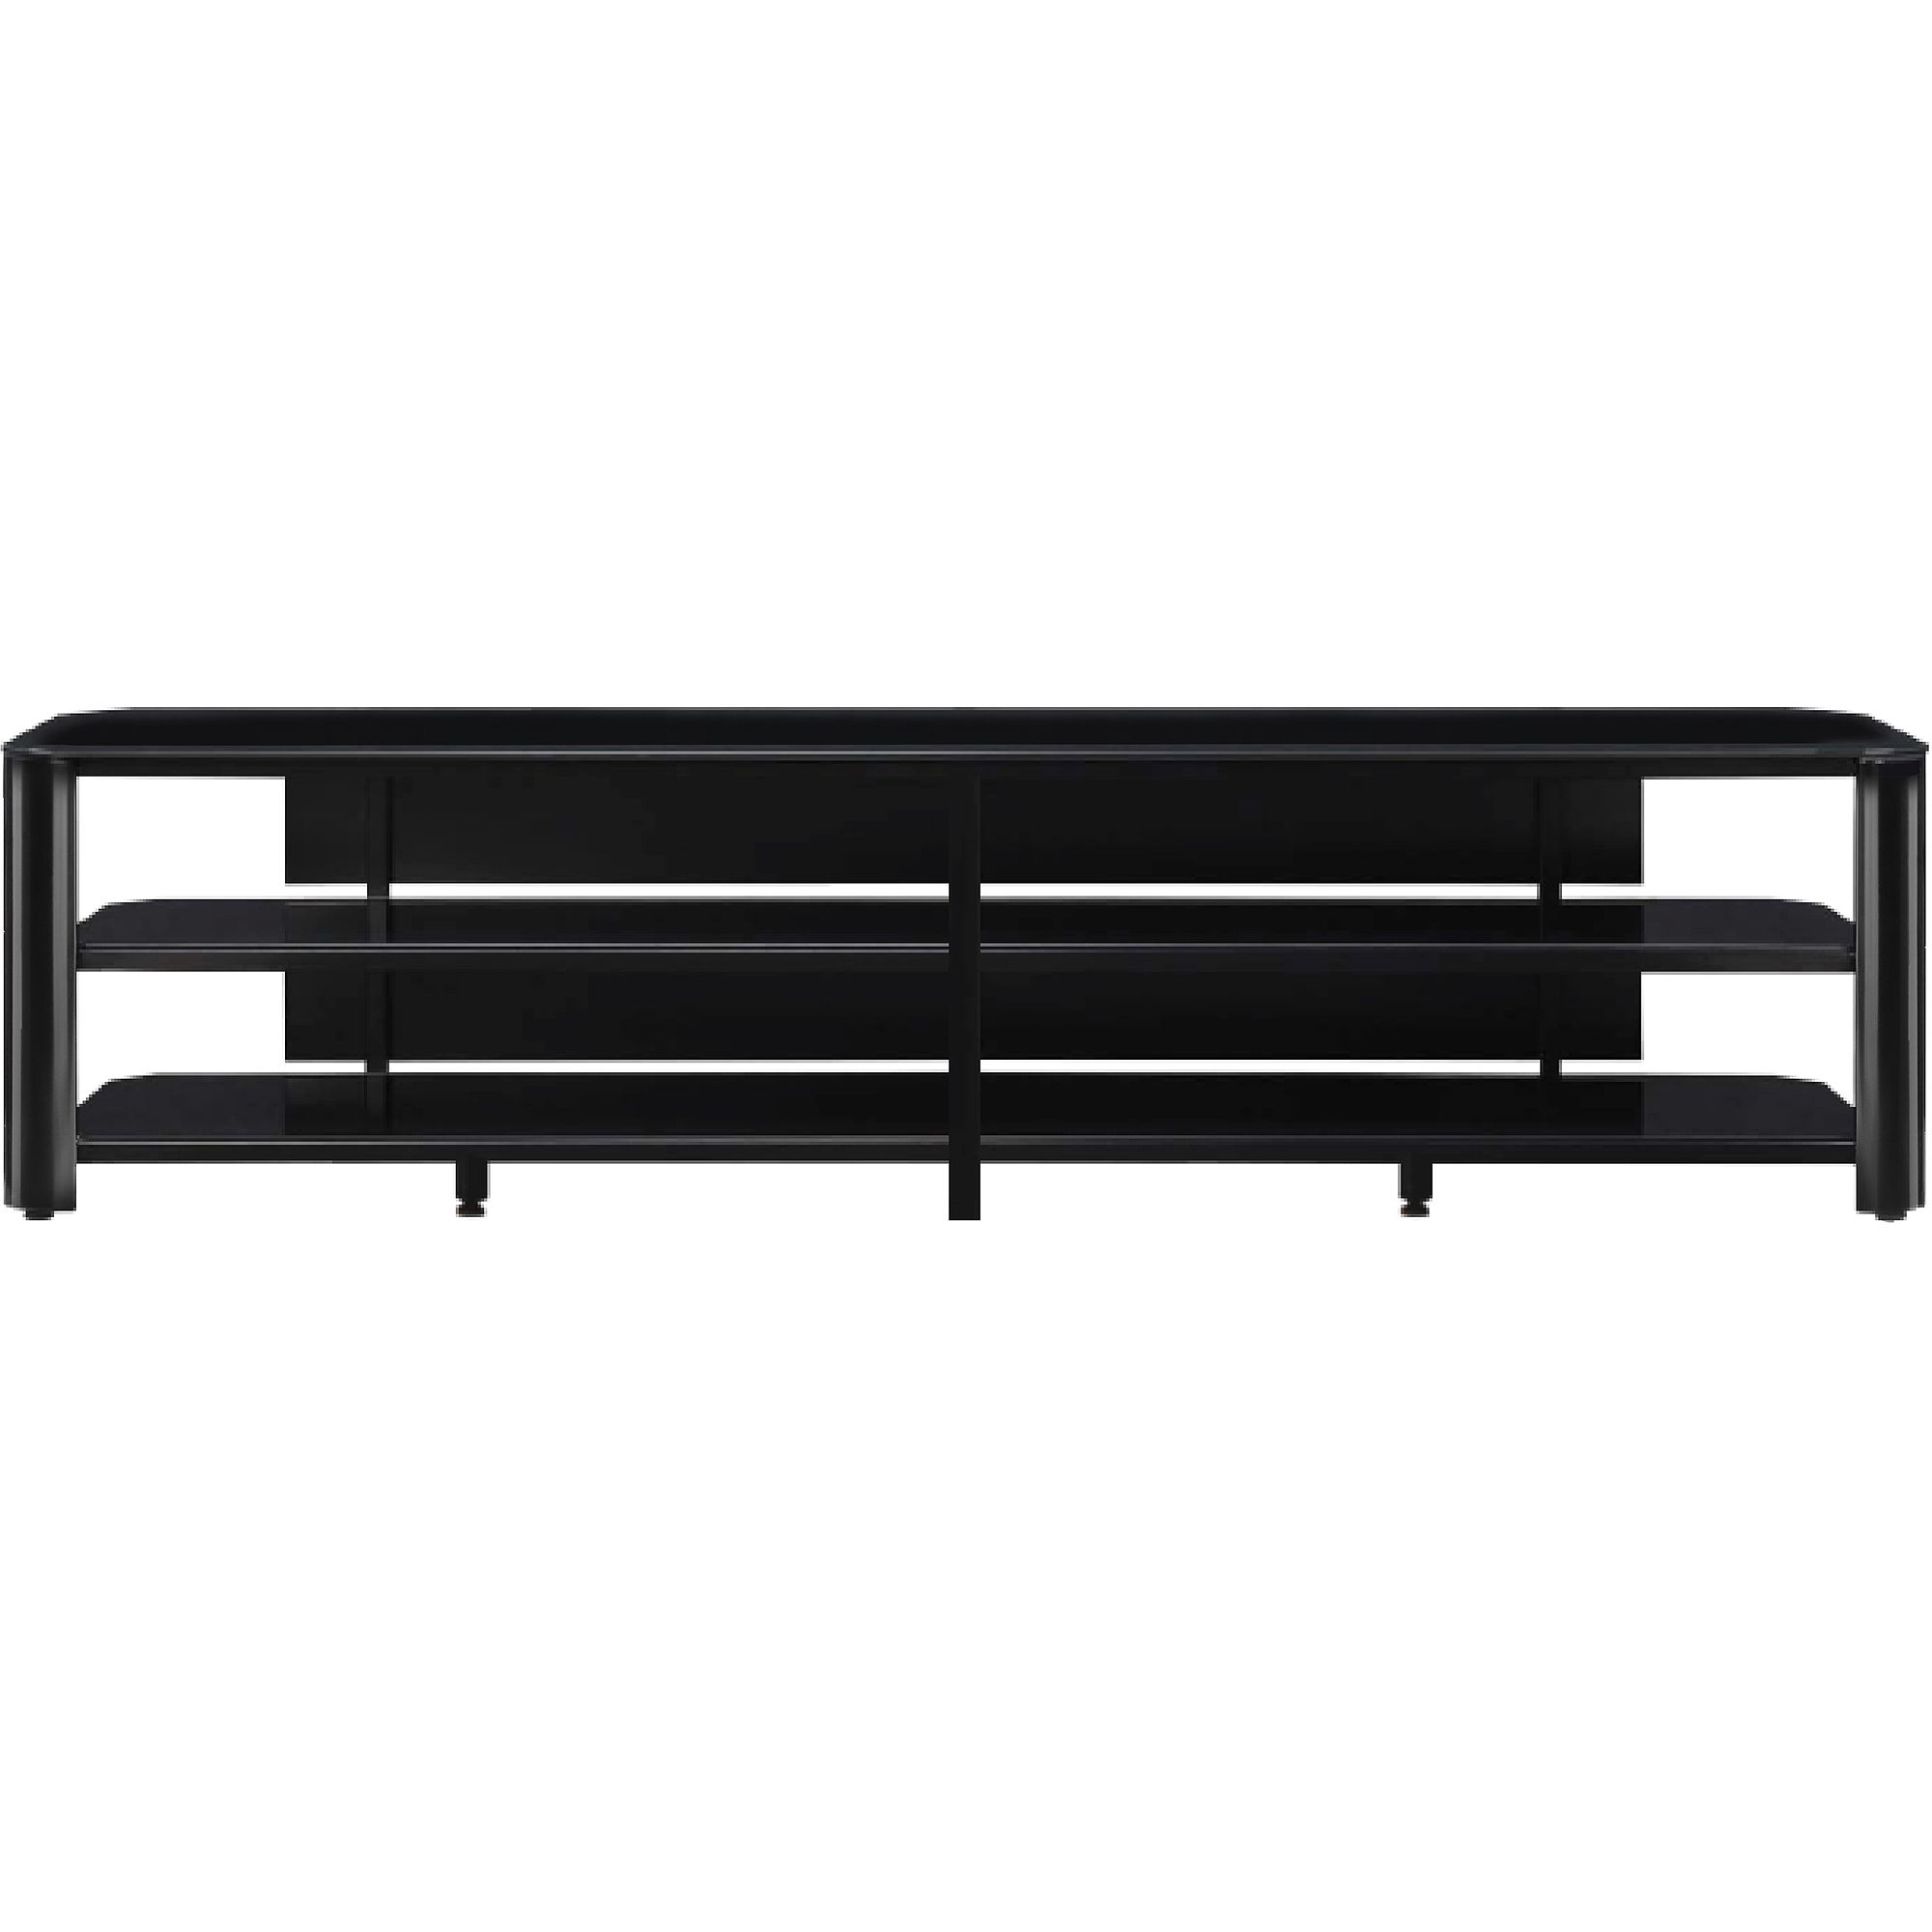 Innovex Oxford Glass Black Tv Stand For Tvs Up To 83" – Walmart Pertaining To Oxford 84 Inch Tv Stands (View 13 of 30)